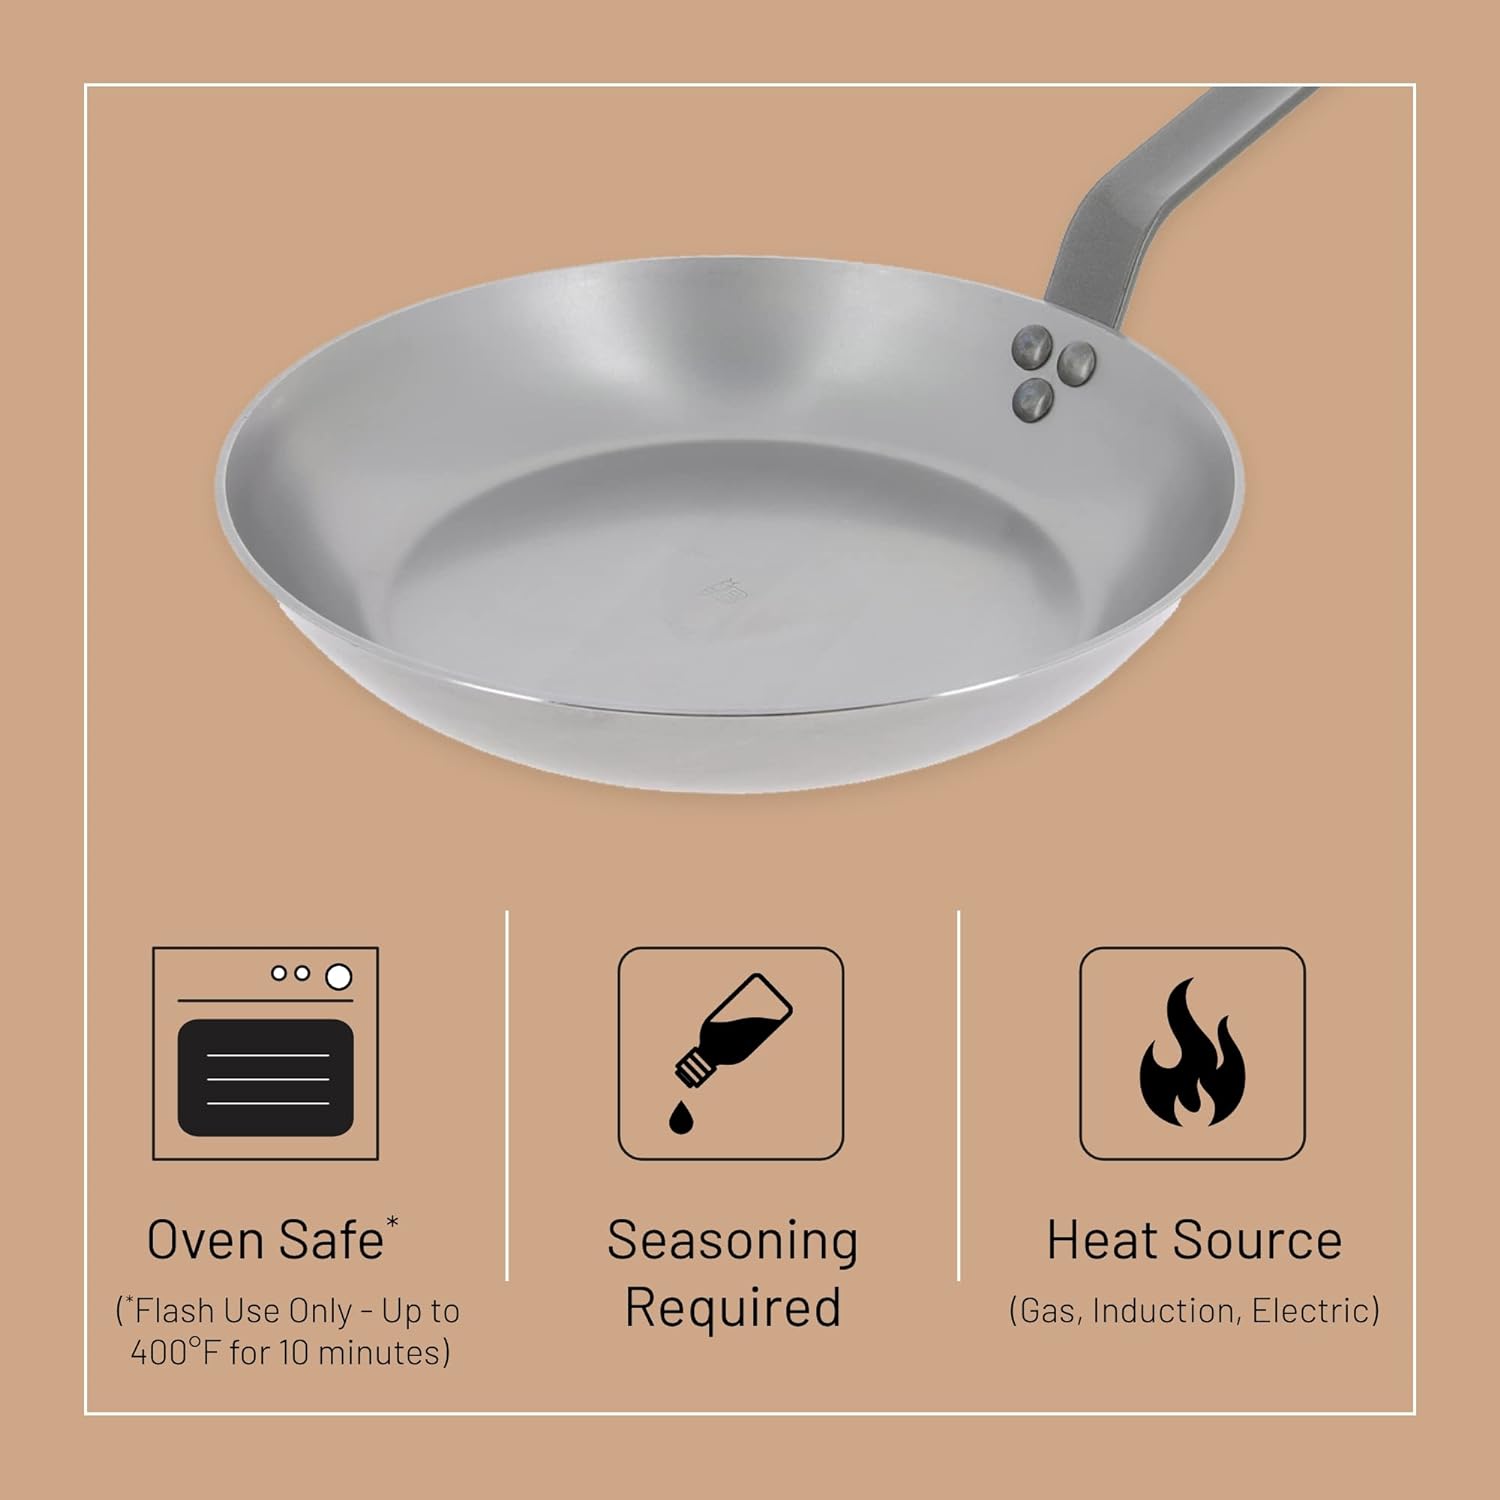 de Buyer MINERAL B Carbon Steel Fry Pan - 8” - Ideal for Searing, Sauteing  Reheating - Naturally Nonstick - Made in France